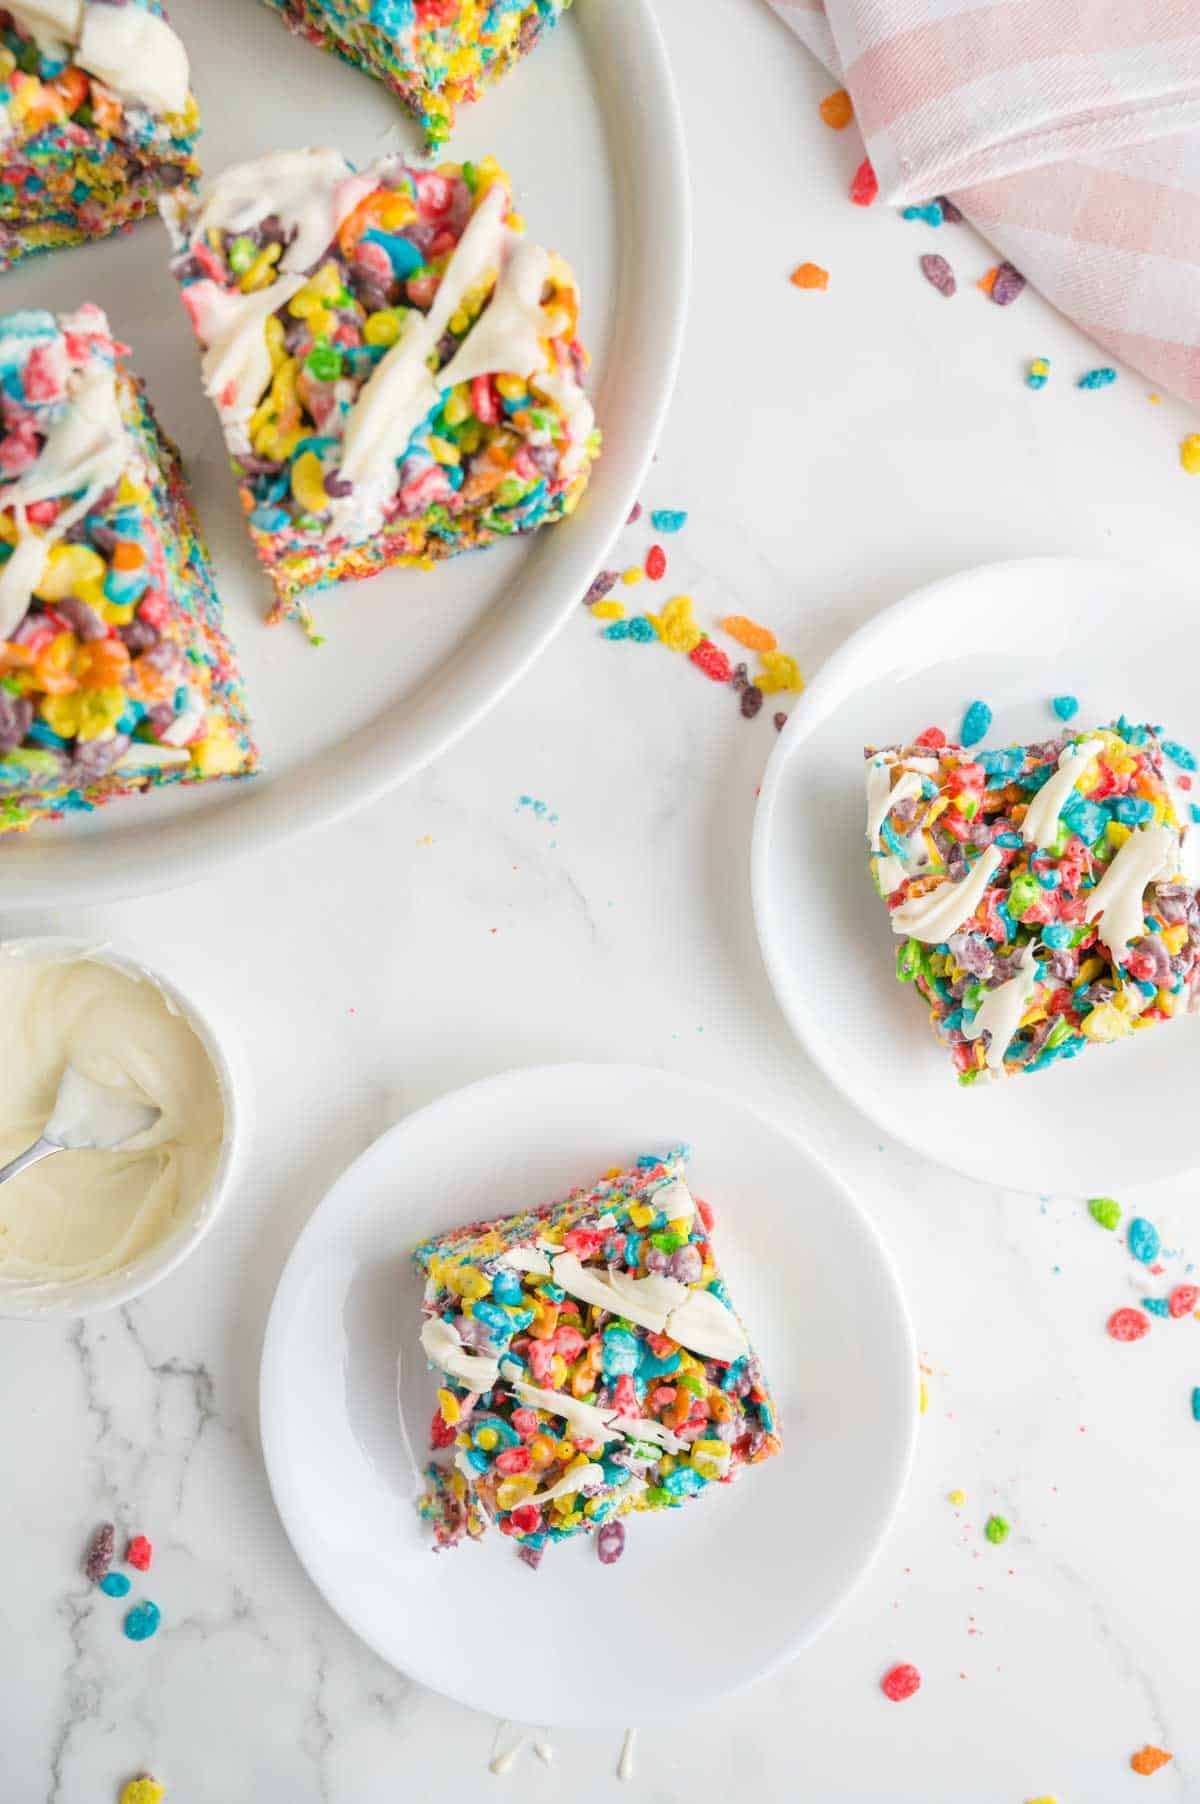 Two plates hold fruity pebbles treats with a plate of treats nearby.